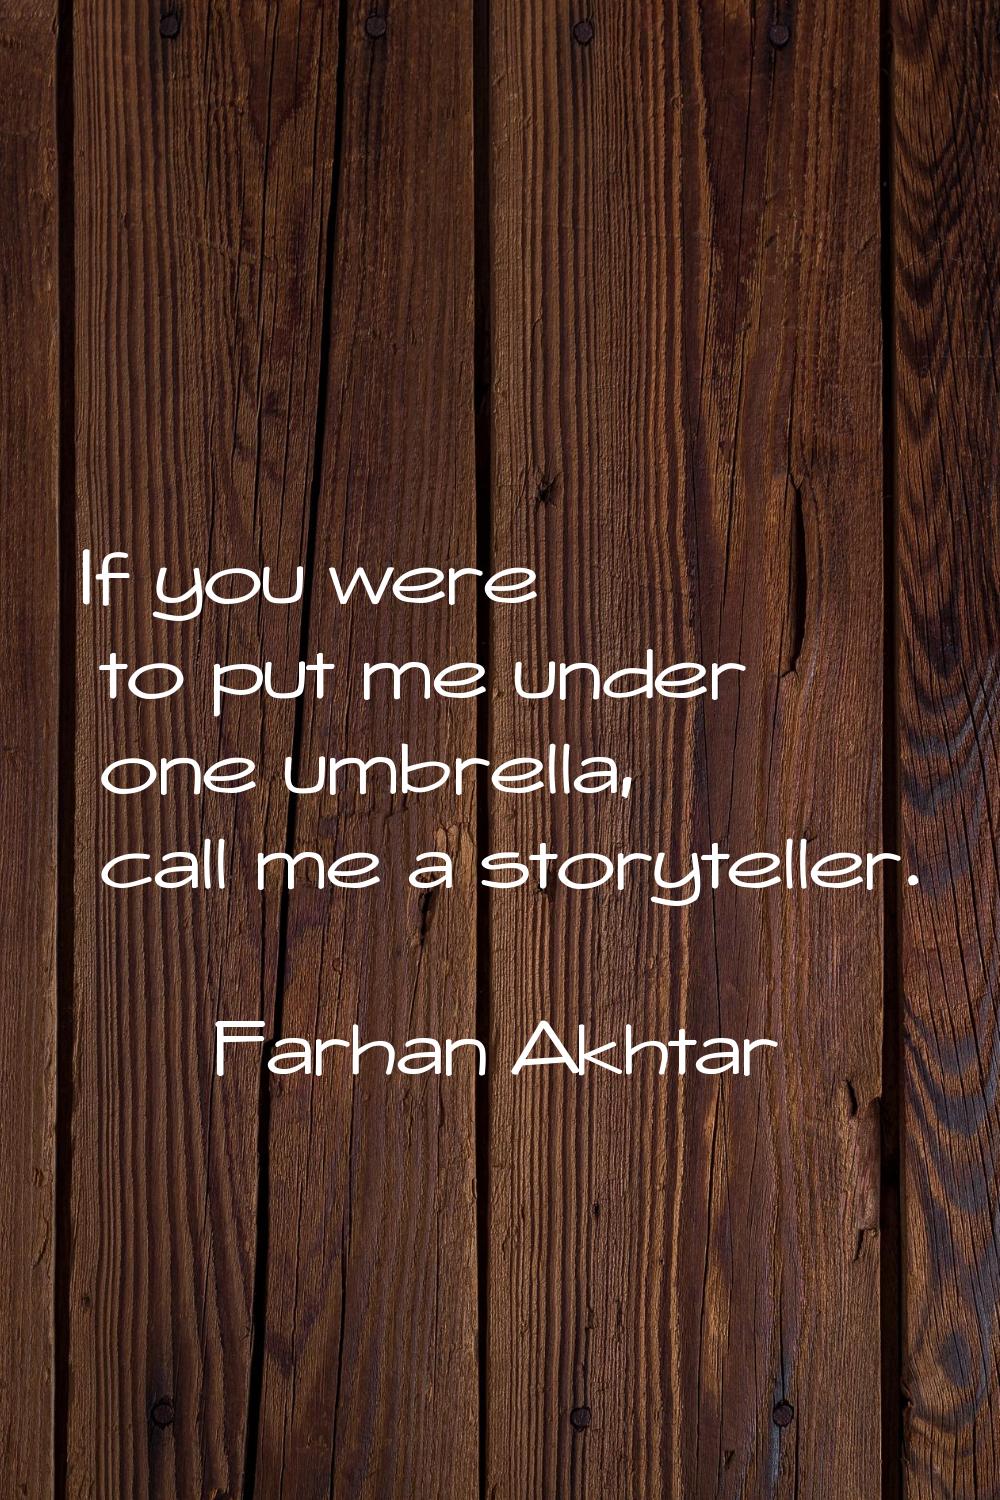 If you were to put me under one umbrella, call me a storyteller.